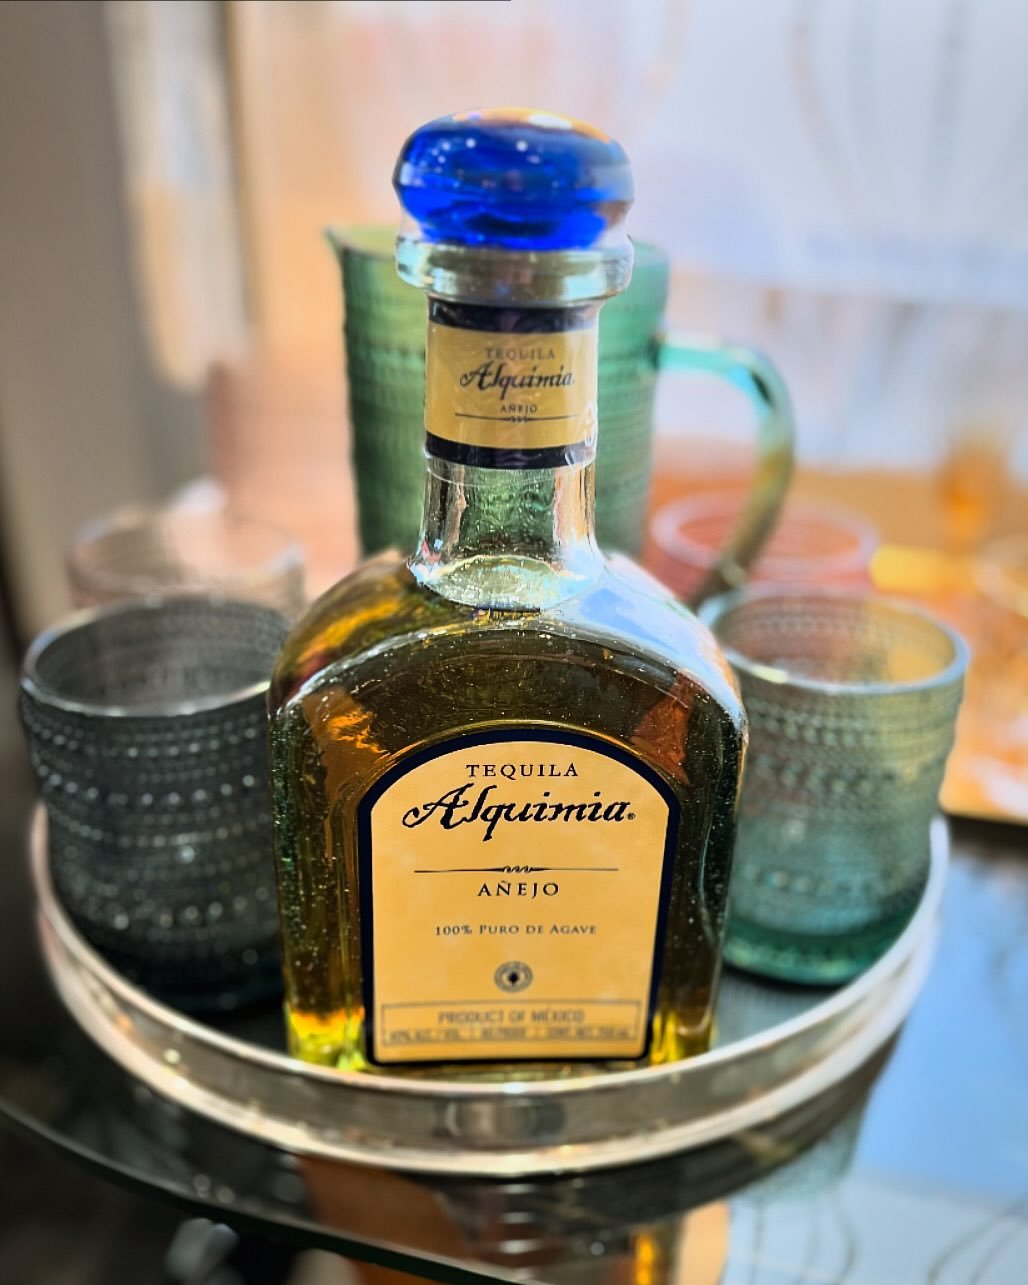 Carmel, oak and cherry highlight this wonderful additive free anejo tequila from @alquimiatequila ~
~
~
#tequila #additivefreetequila #alquimia #drinkup #agaveholic #anejo #cocktailbar #homebar #thereyougo #drinking